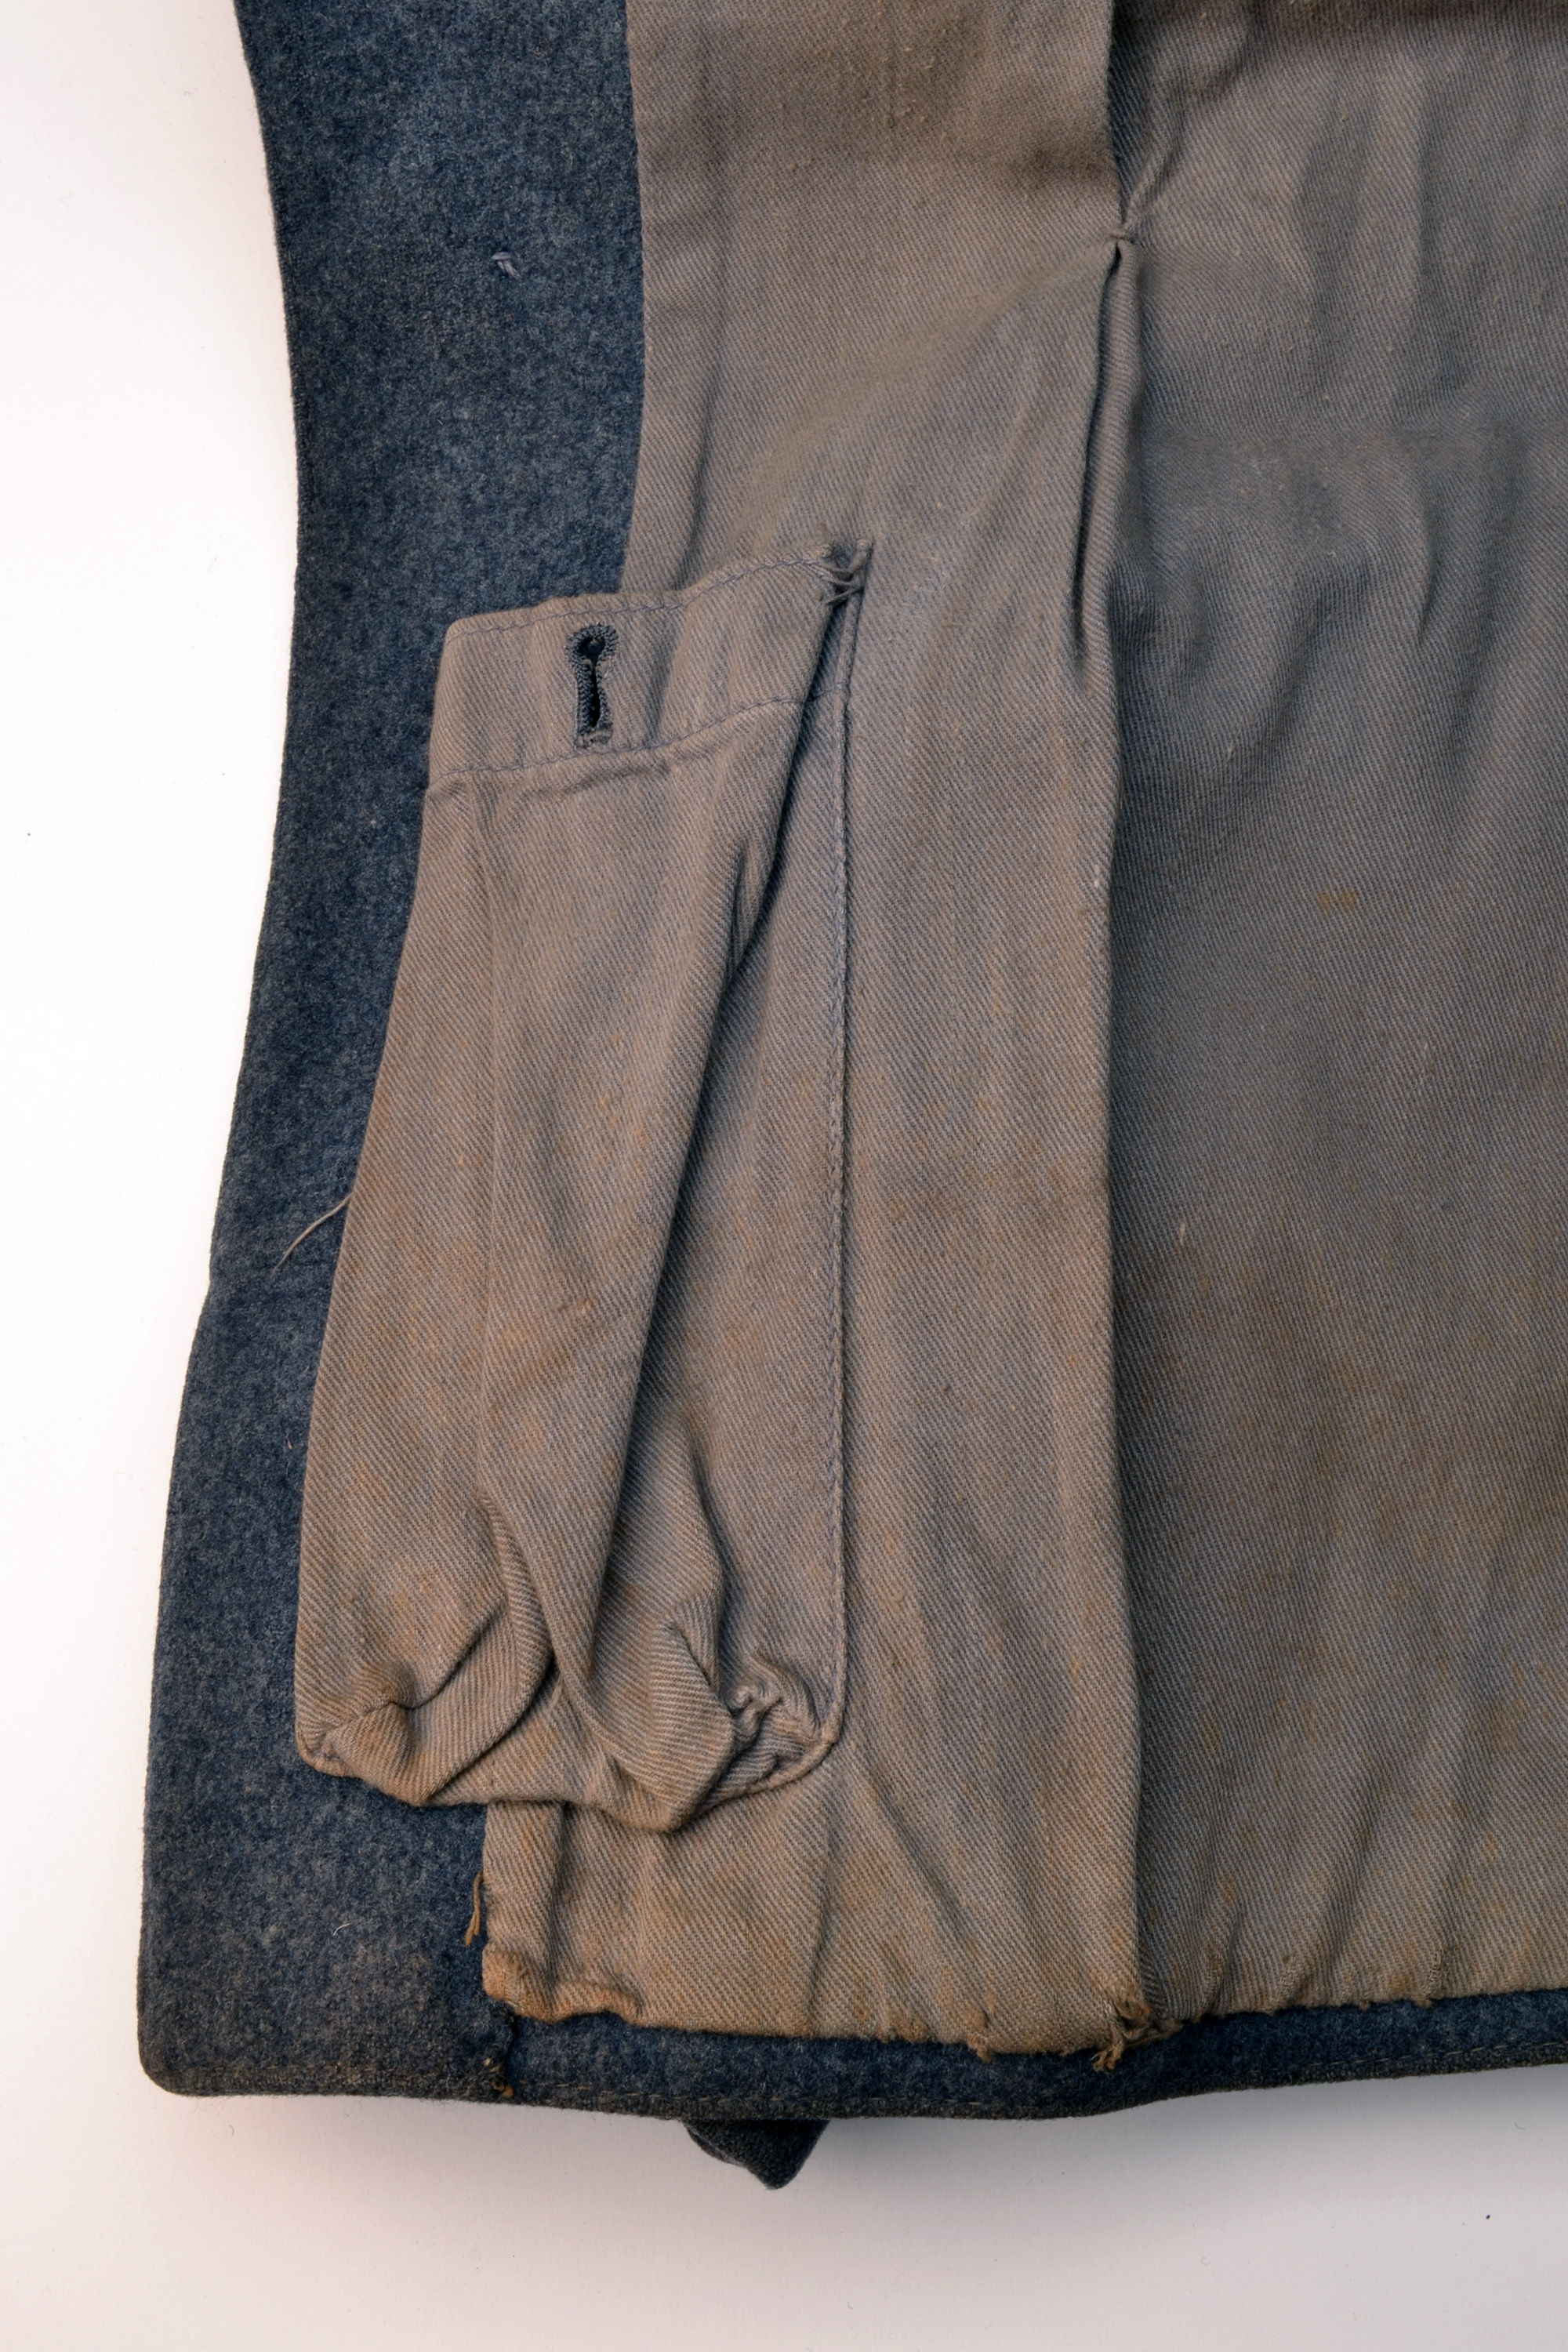 A WORLD WAR TWO LUFTWAFFE TUNIC FOR A 'STABSGEFREITER' TOGETHER WITH ITS LEATHER WAISTBELT AND - Image 5 of 9